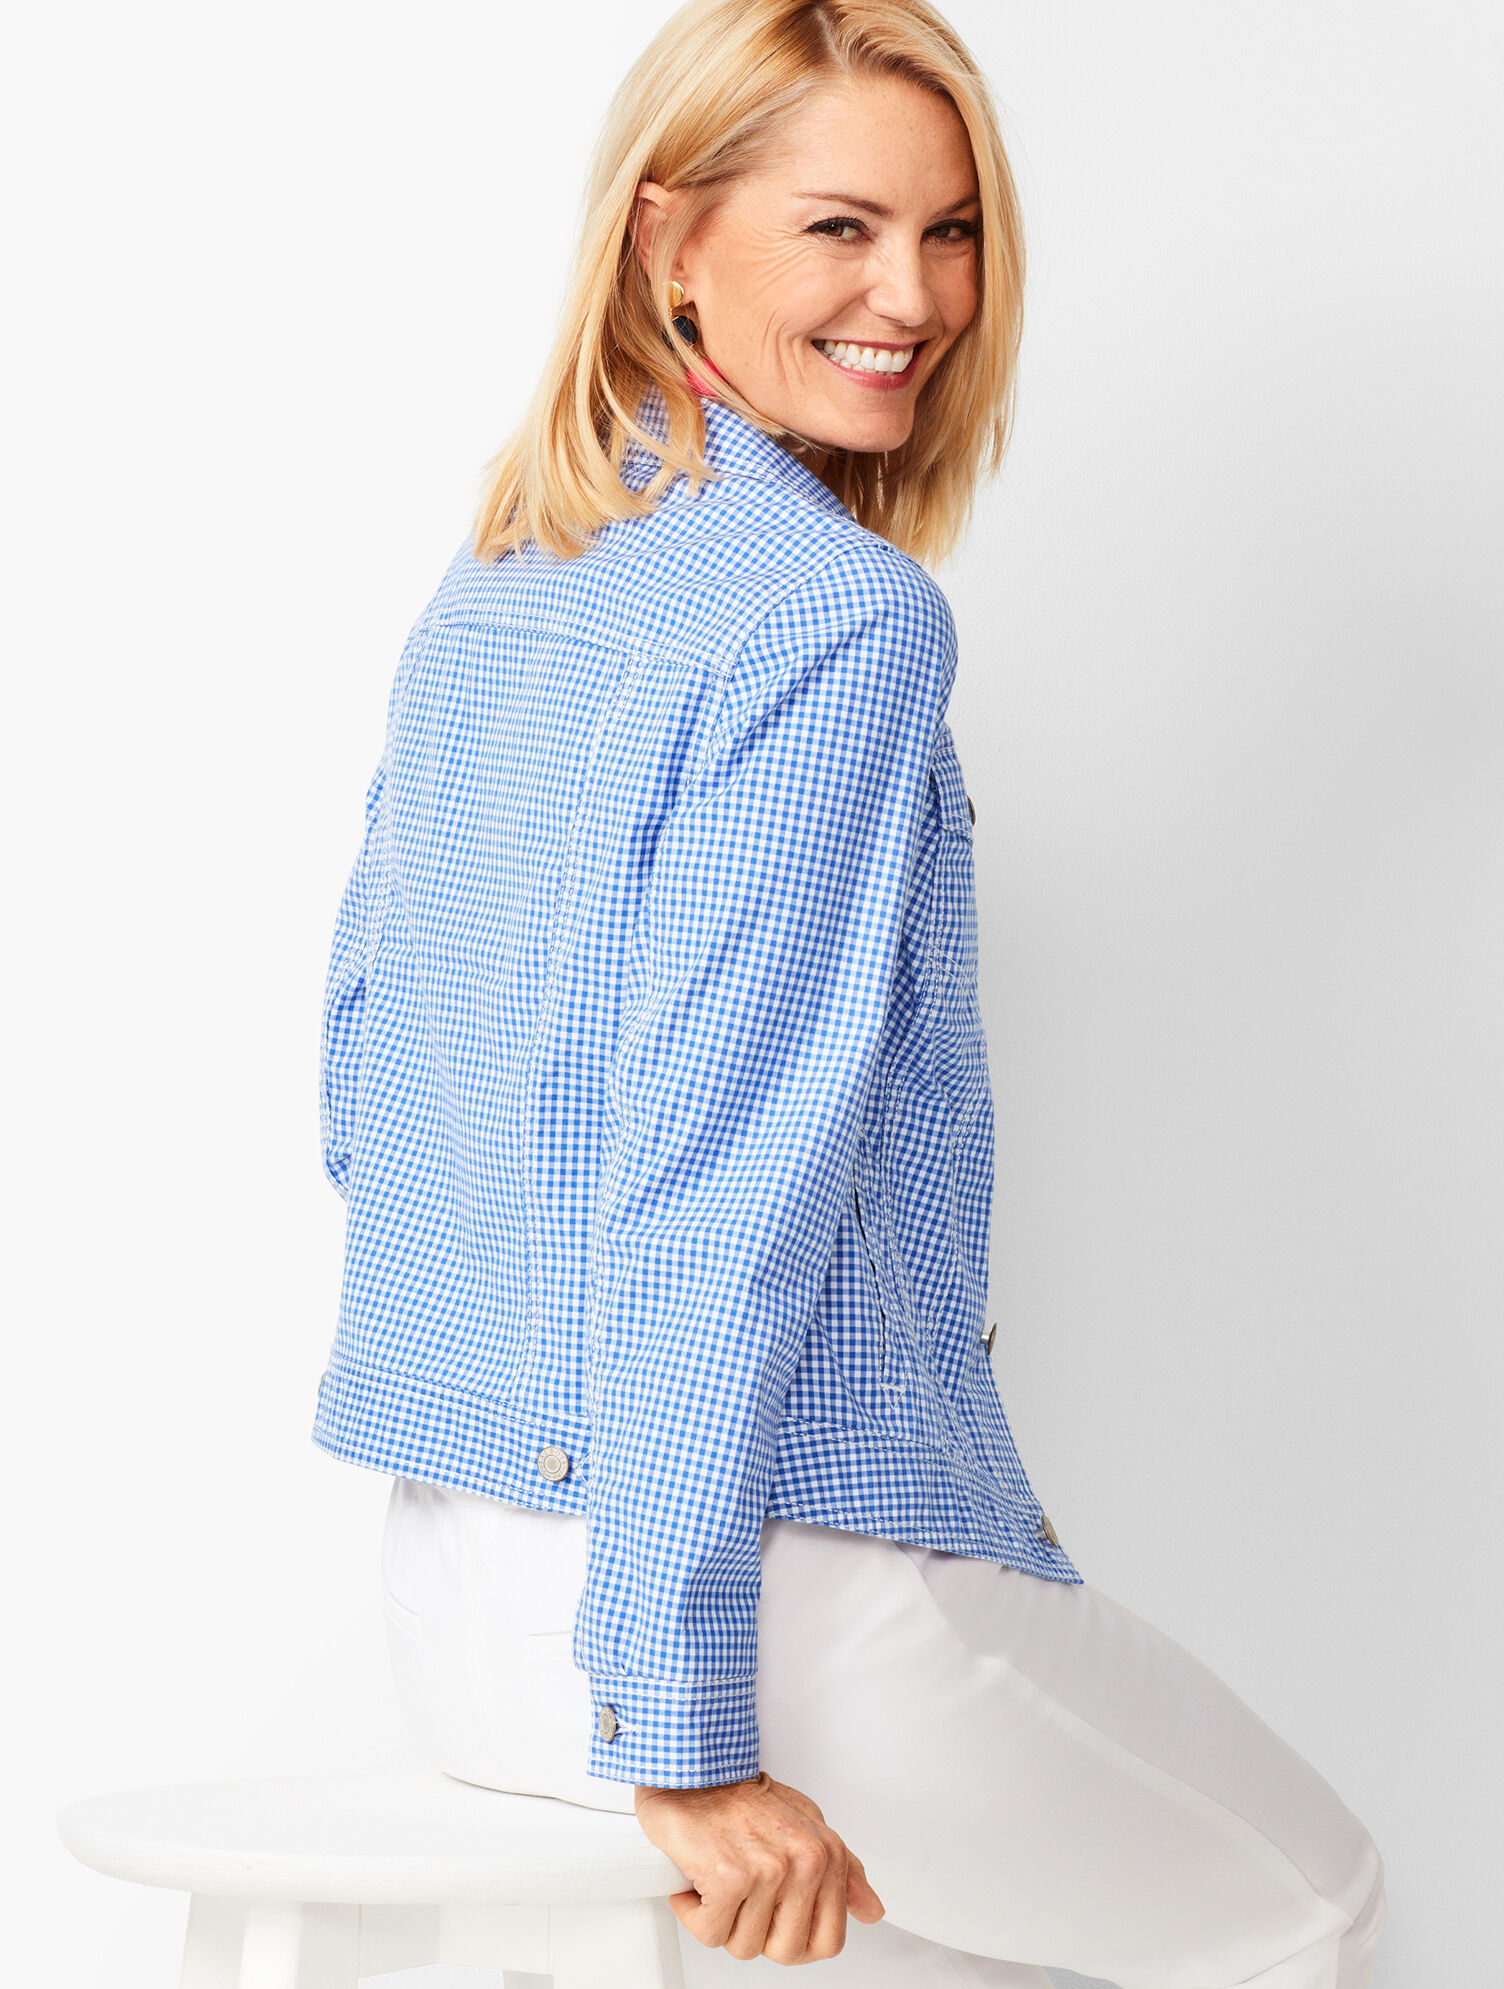 Talbots Women 4 Jacket Blue White Check Cotton Gingham Lined ID1524